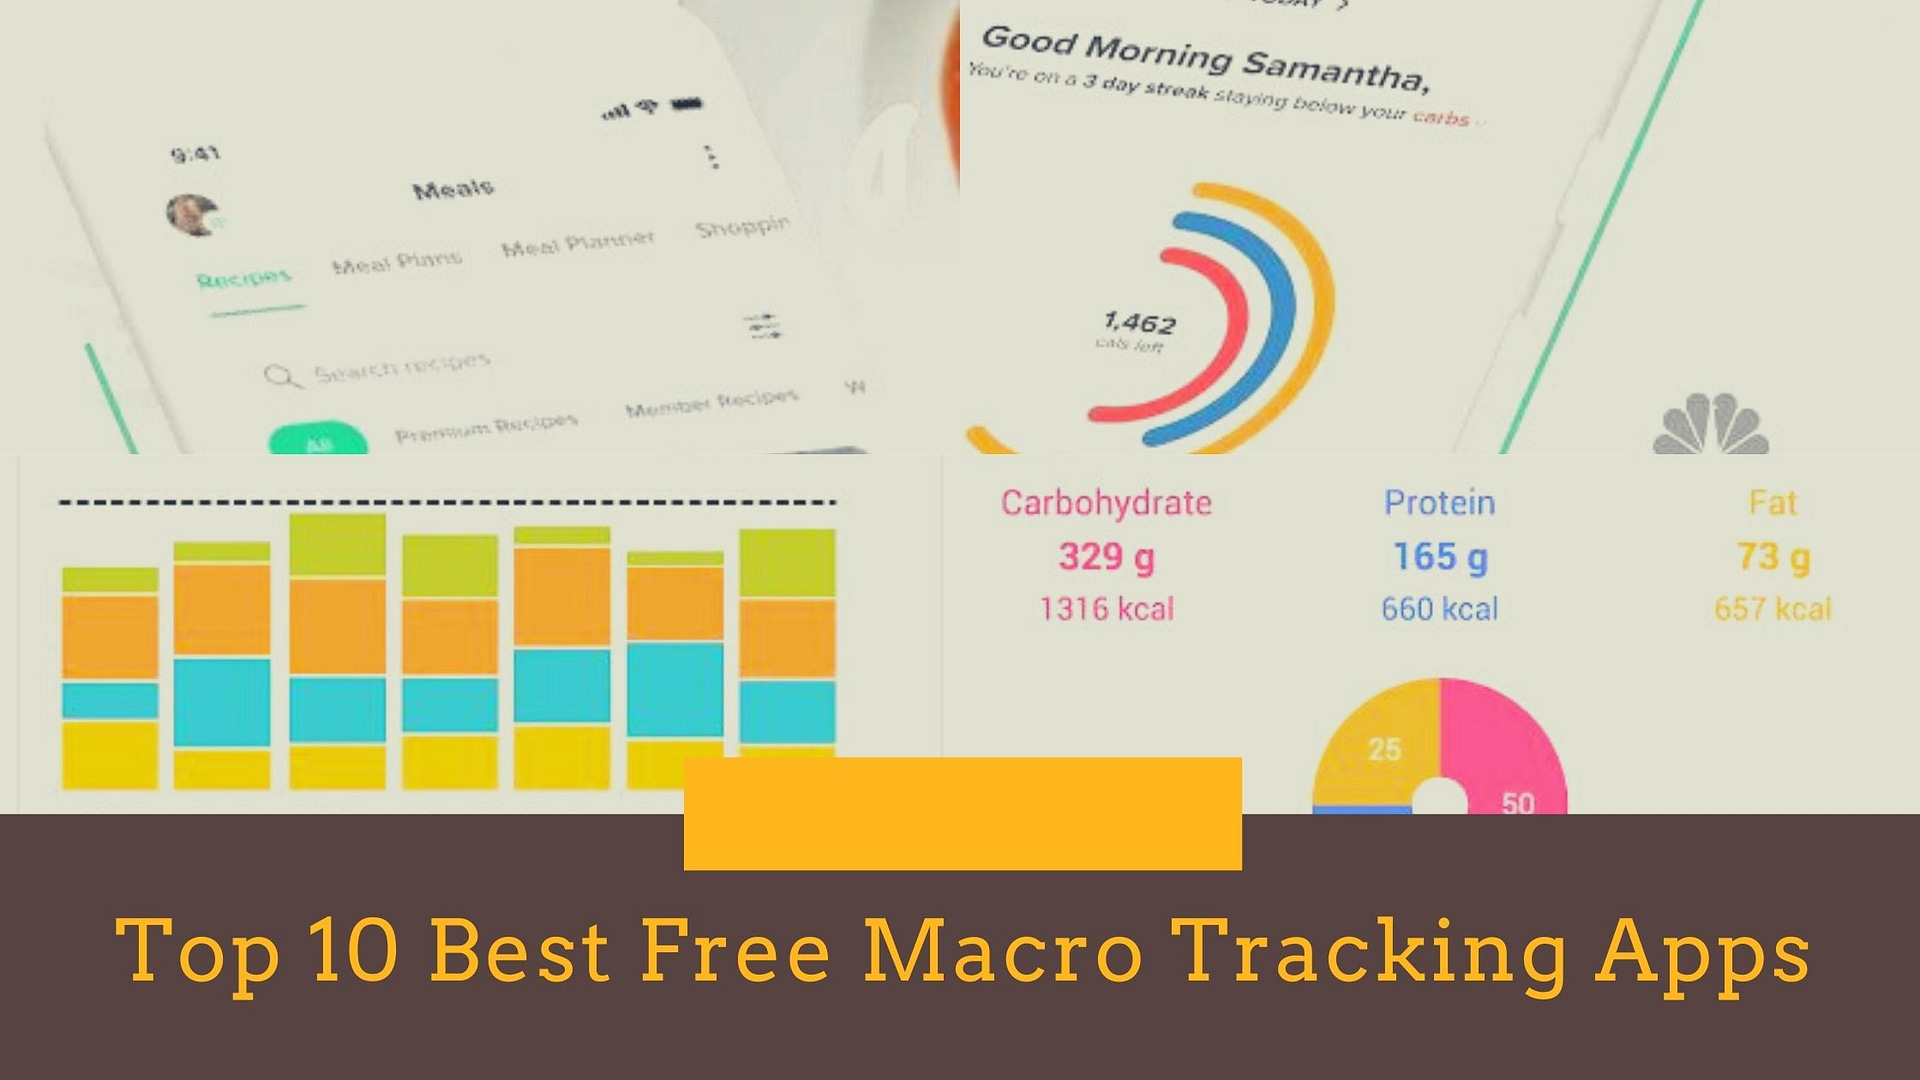 Top 10 Best Free Macro Tracking Apps